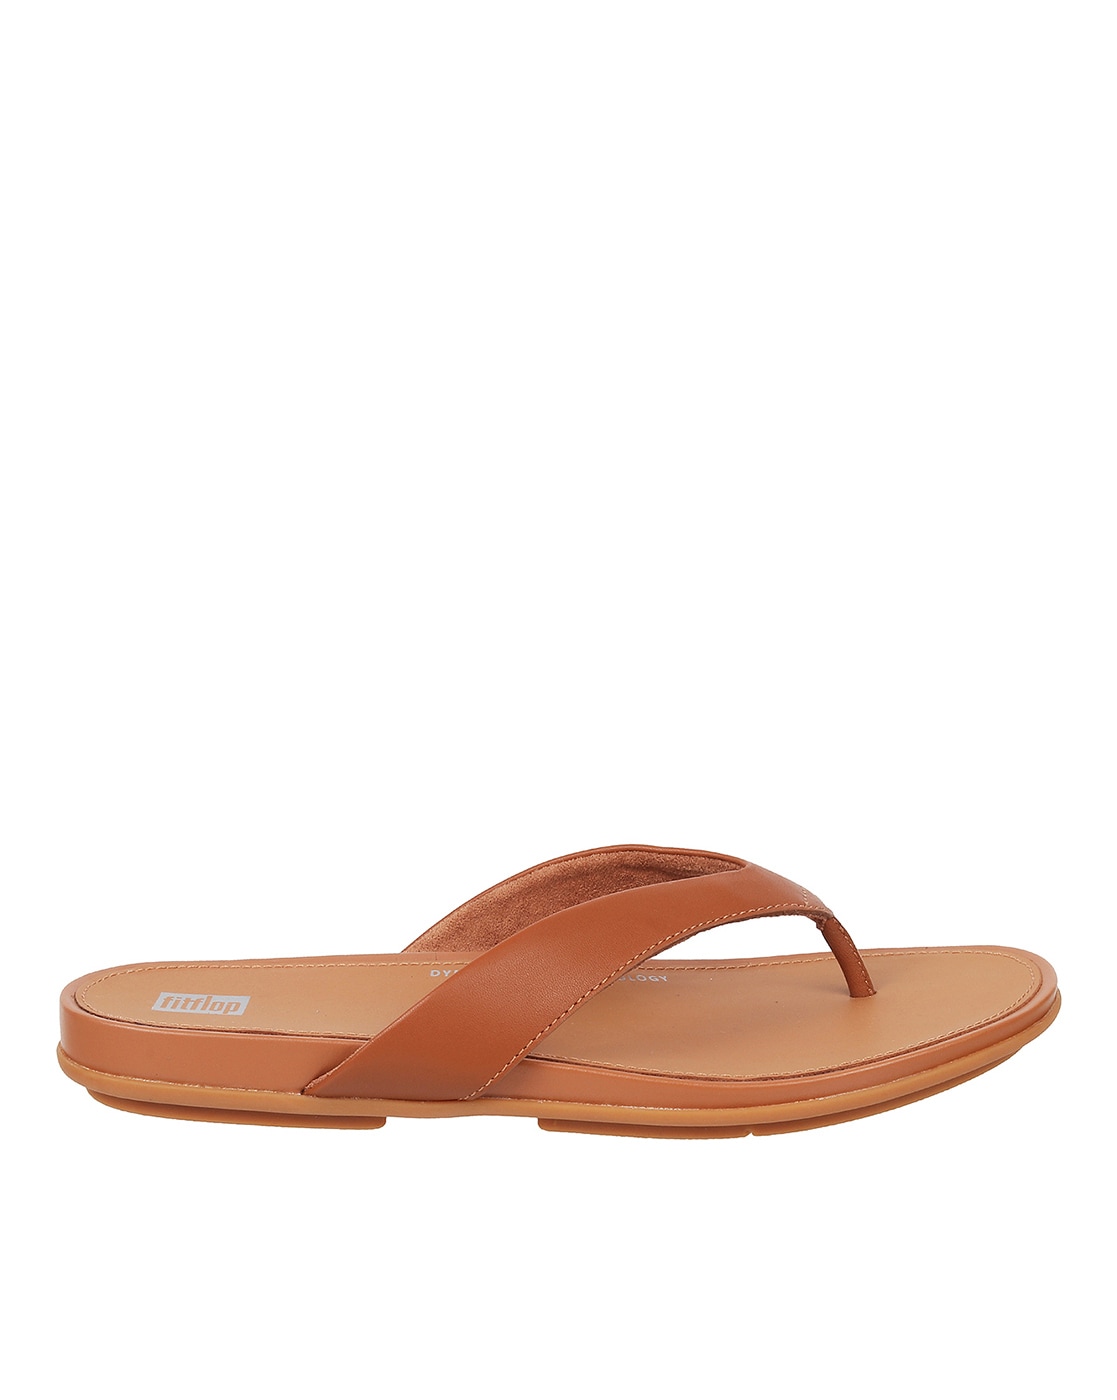 Fitflop Loafers Mens India - Fitflop Shoes Sale Online